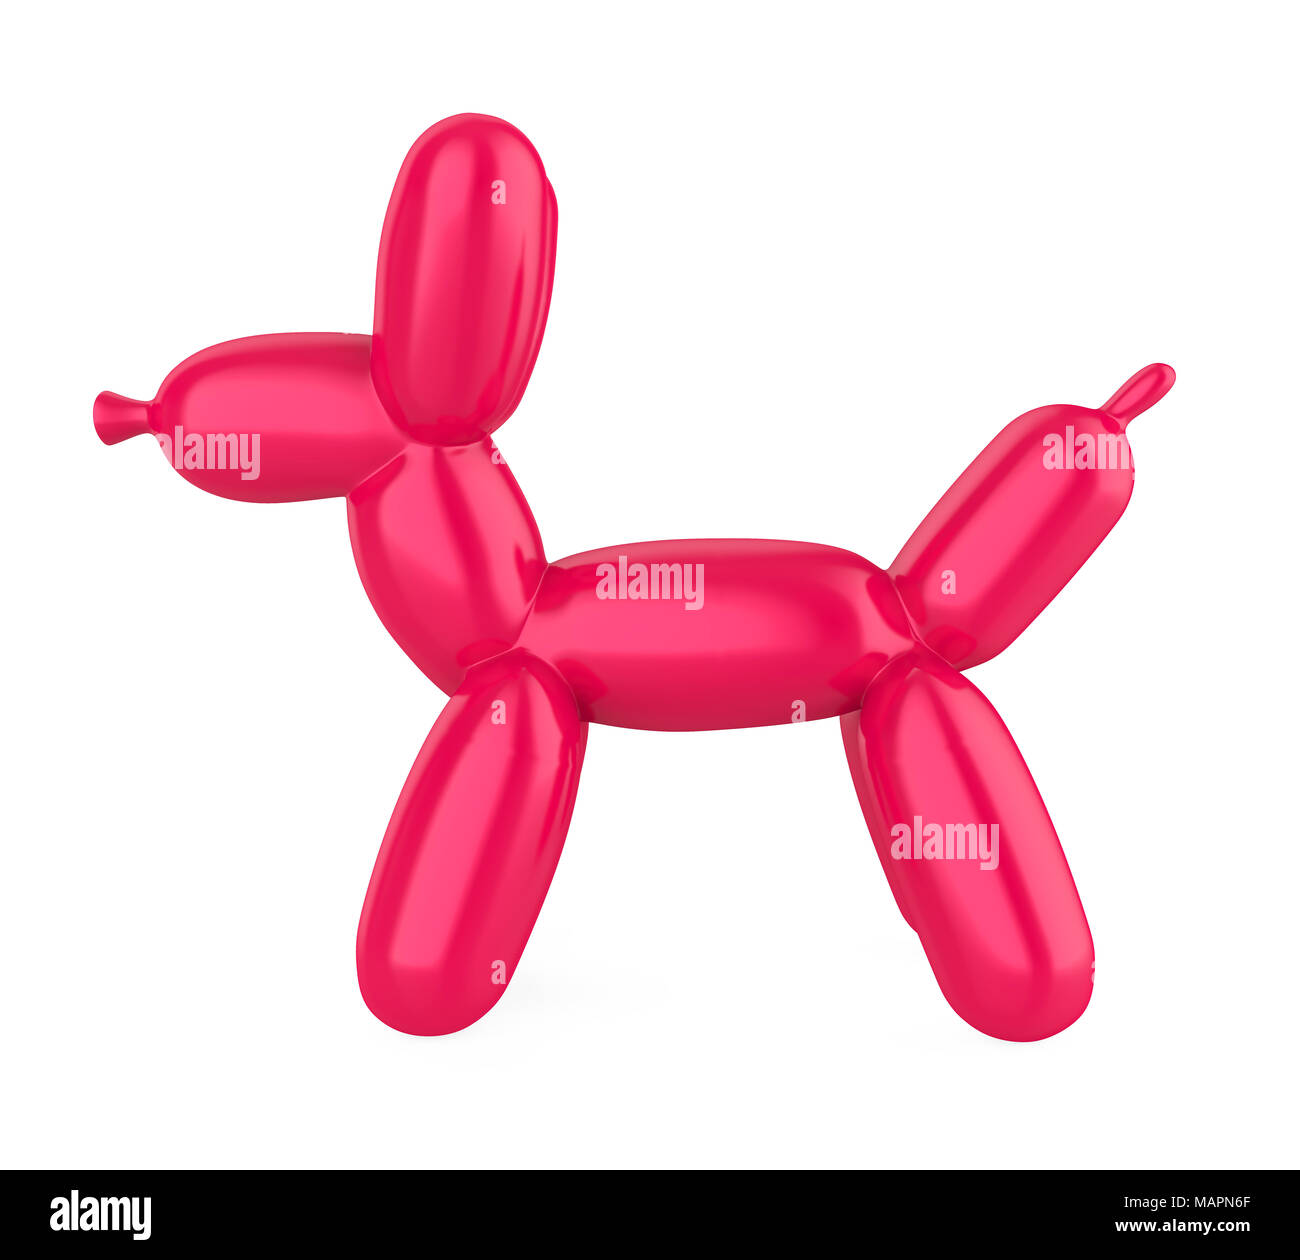 Balloon Dog Isolated Banque D'Images